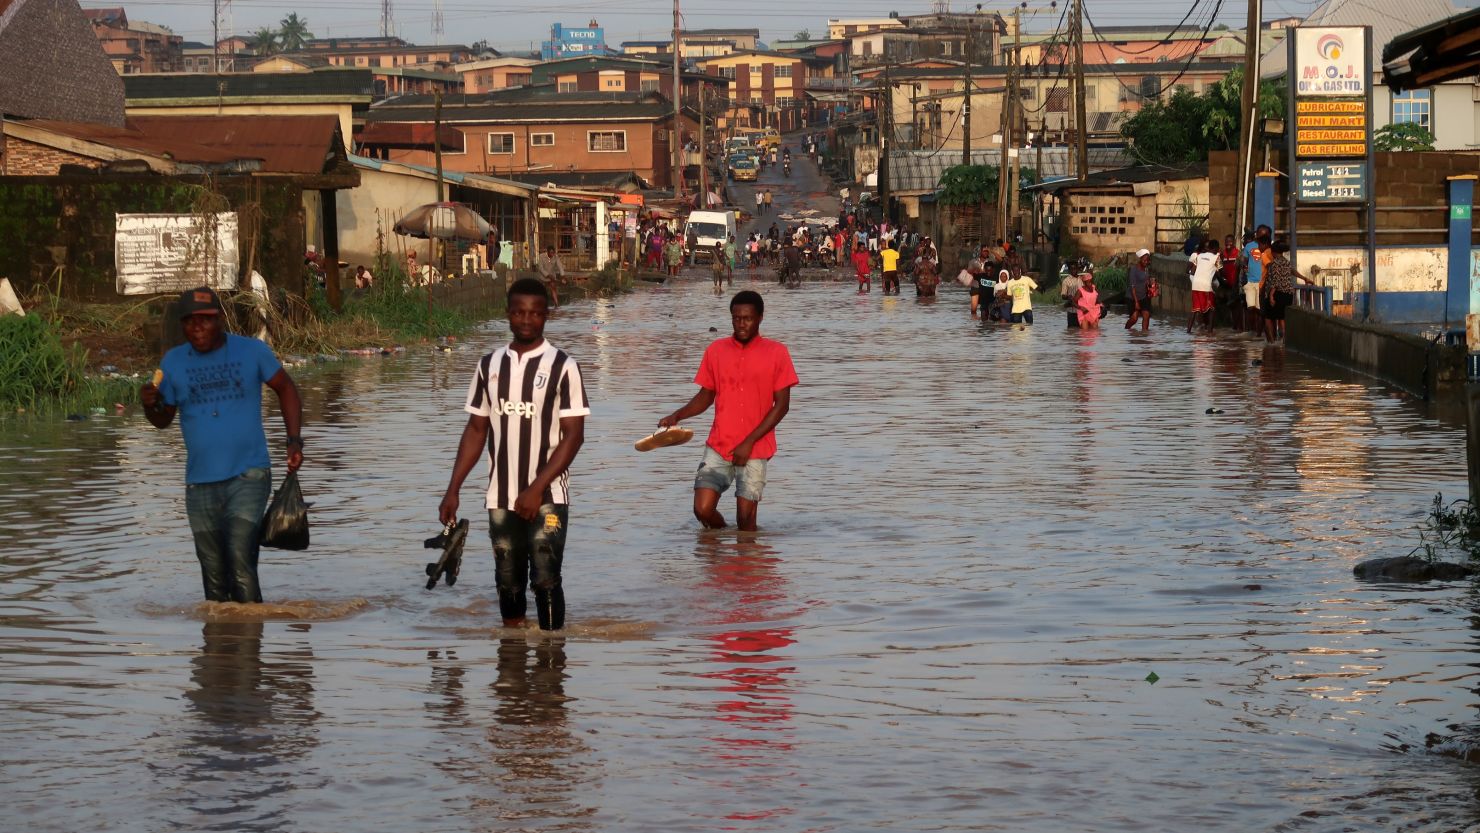 Lagos under siege from floods after hours of heavy downpour